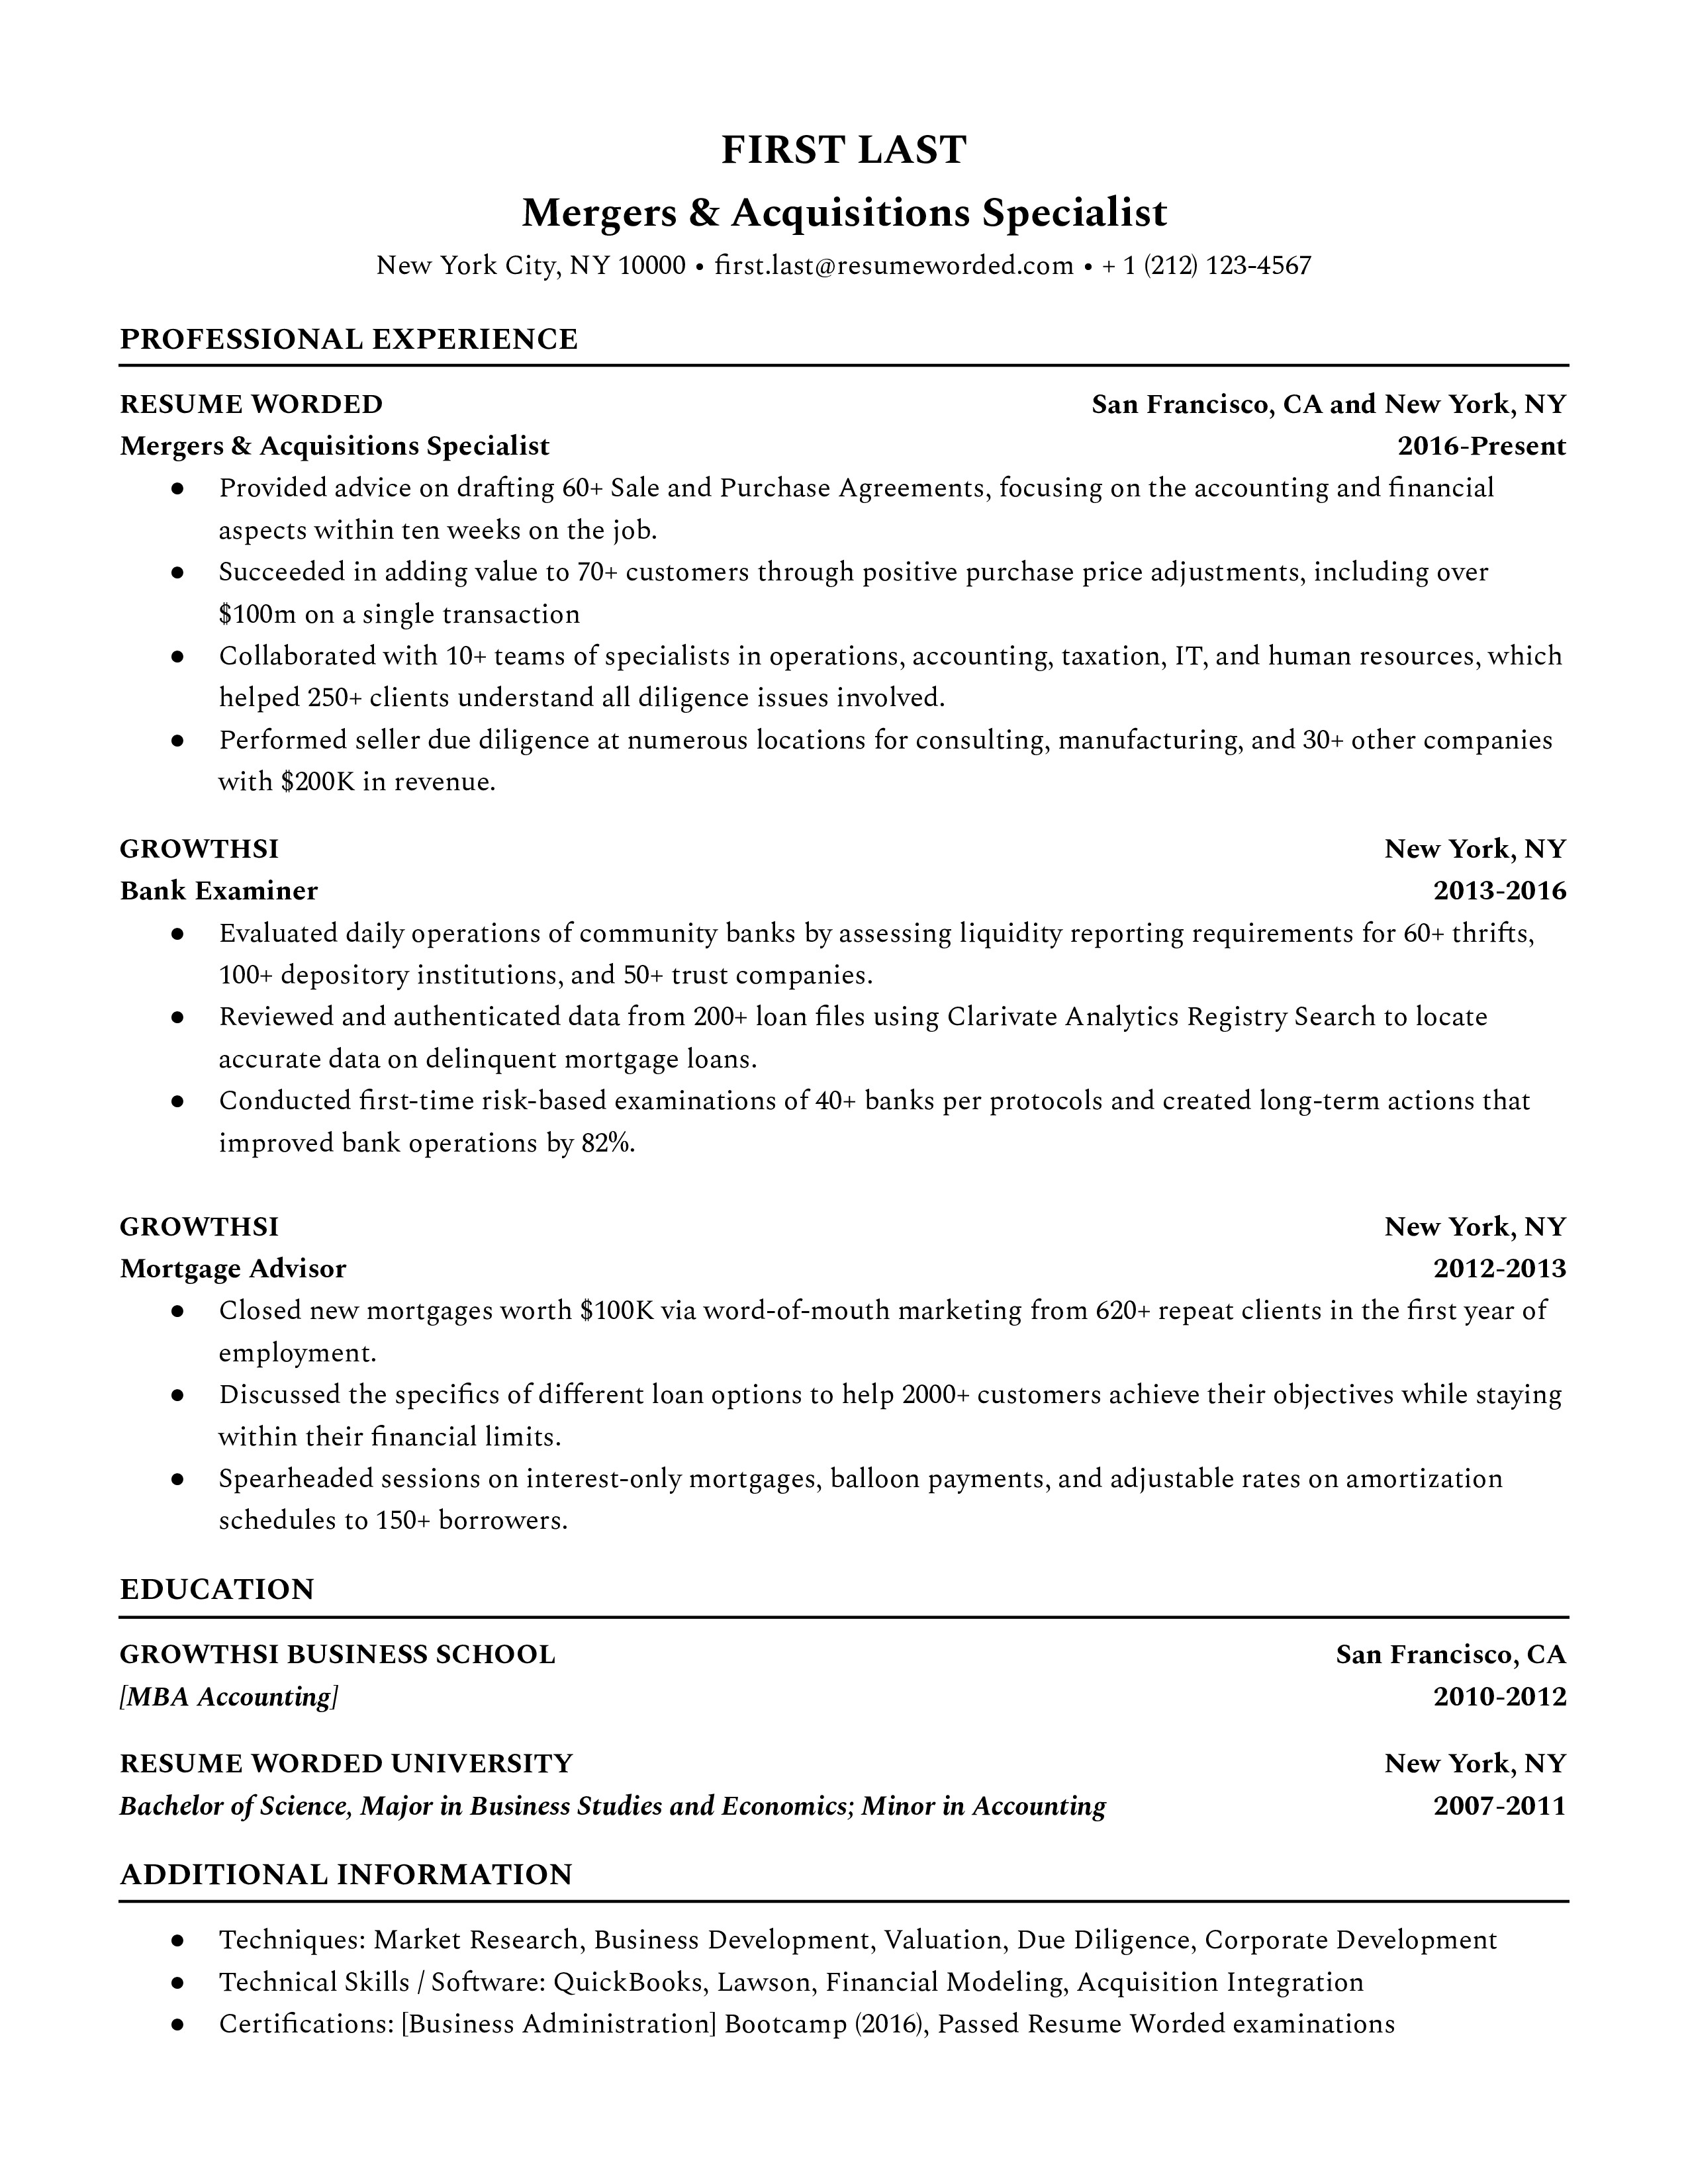 Mergers & Acquisitions Specialist Resume Sample